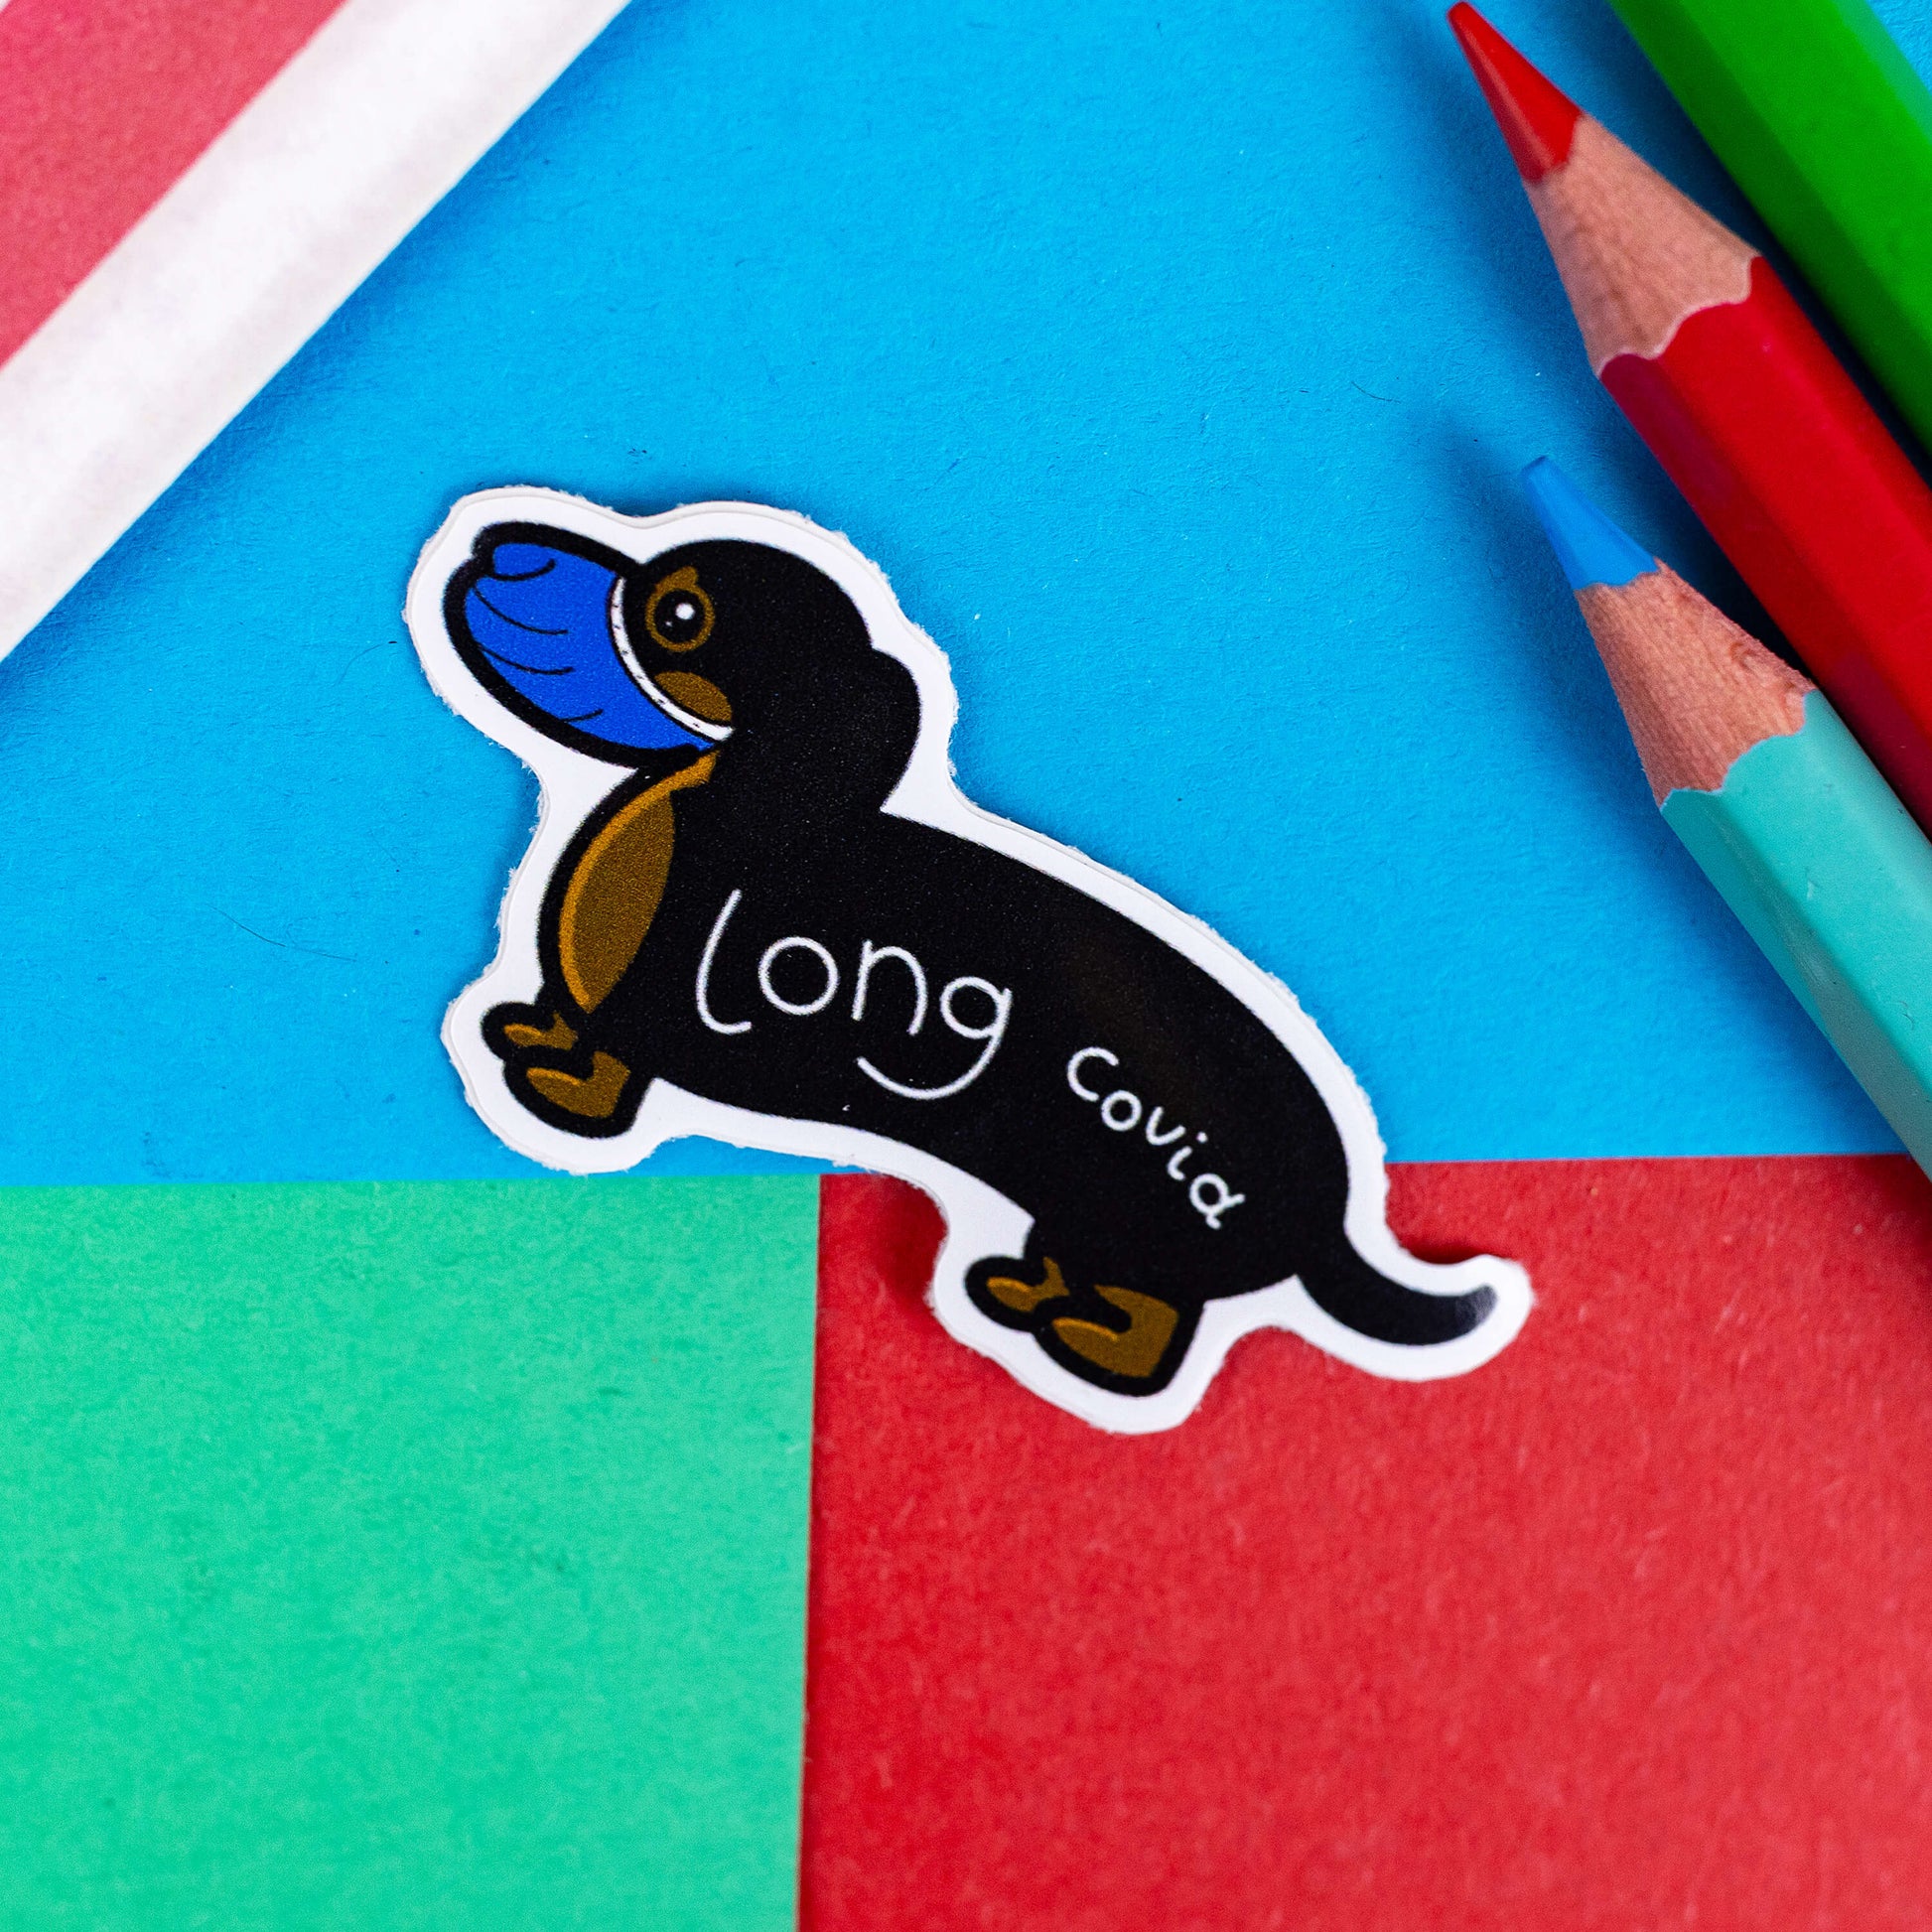 A brown and black sausage dog sticker wearing a blue medical mask over mouth and nose and 'long covid' written across it's body in white. The sticker is shown on a red and blue background. The hand drawn design is raising awareness for long covid corona virus.